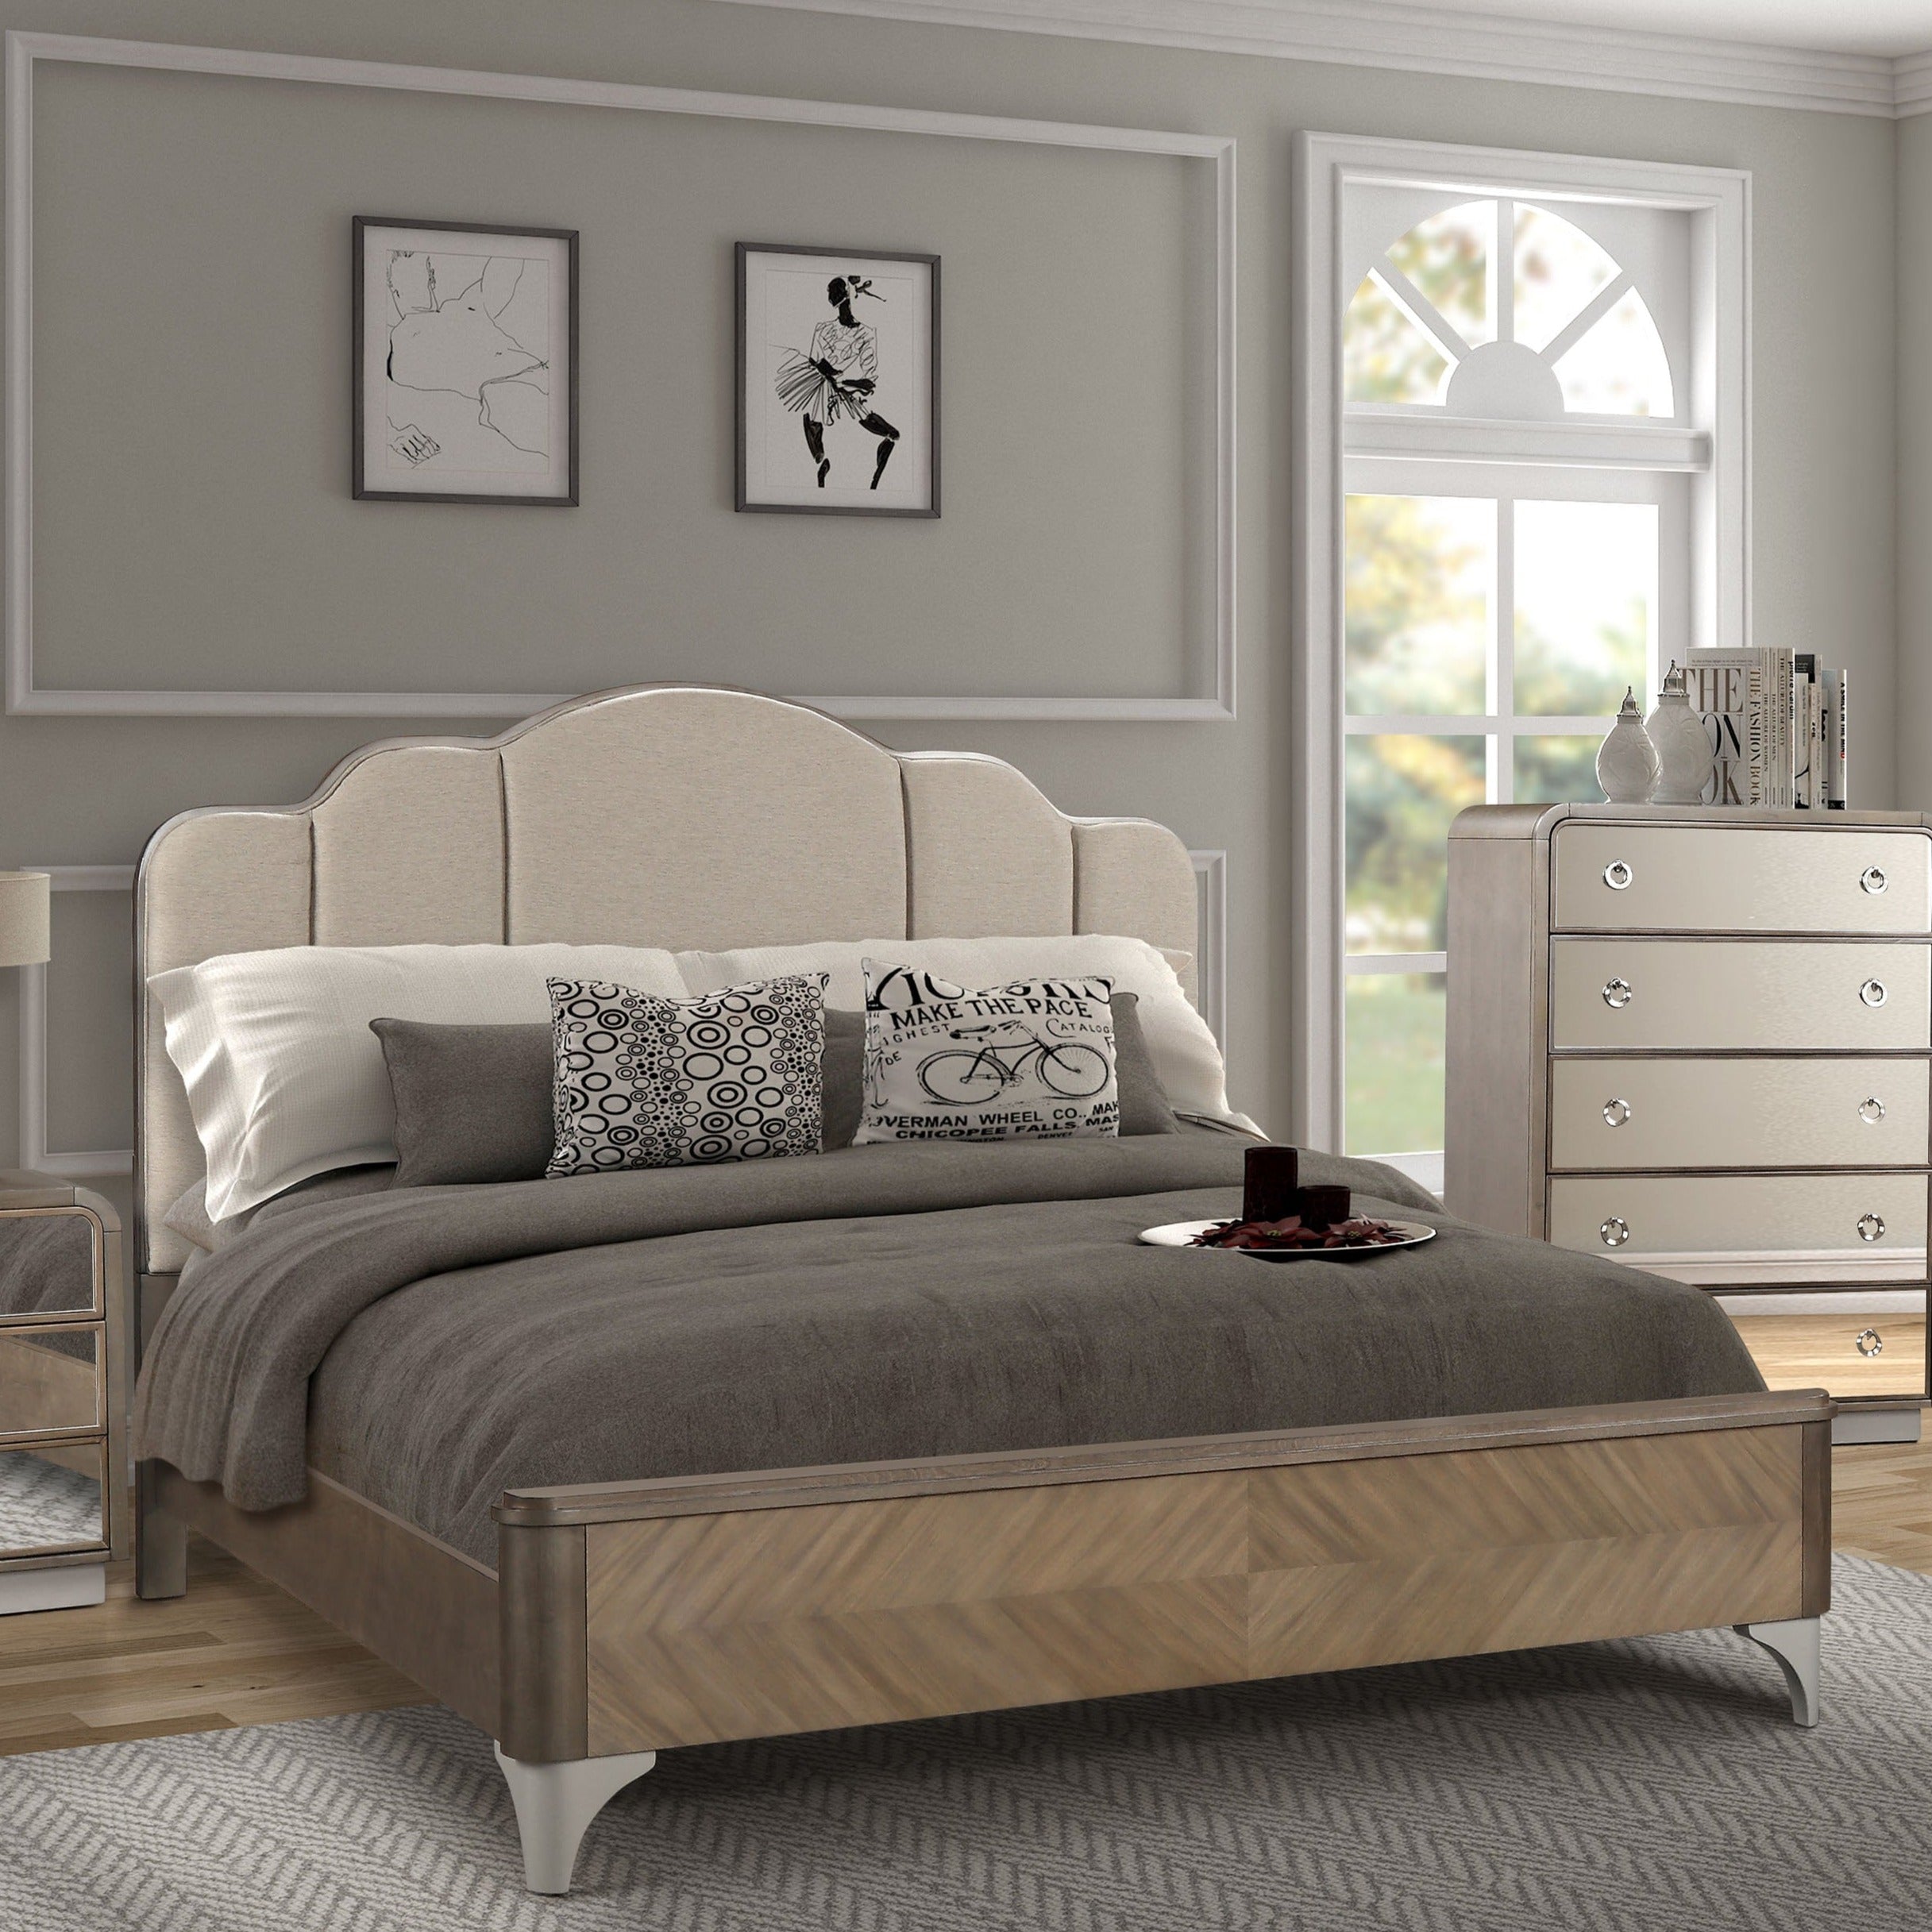 Oasis Home Cascade Upholstered Bed King Size